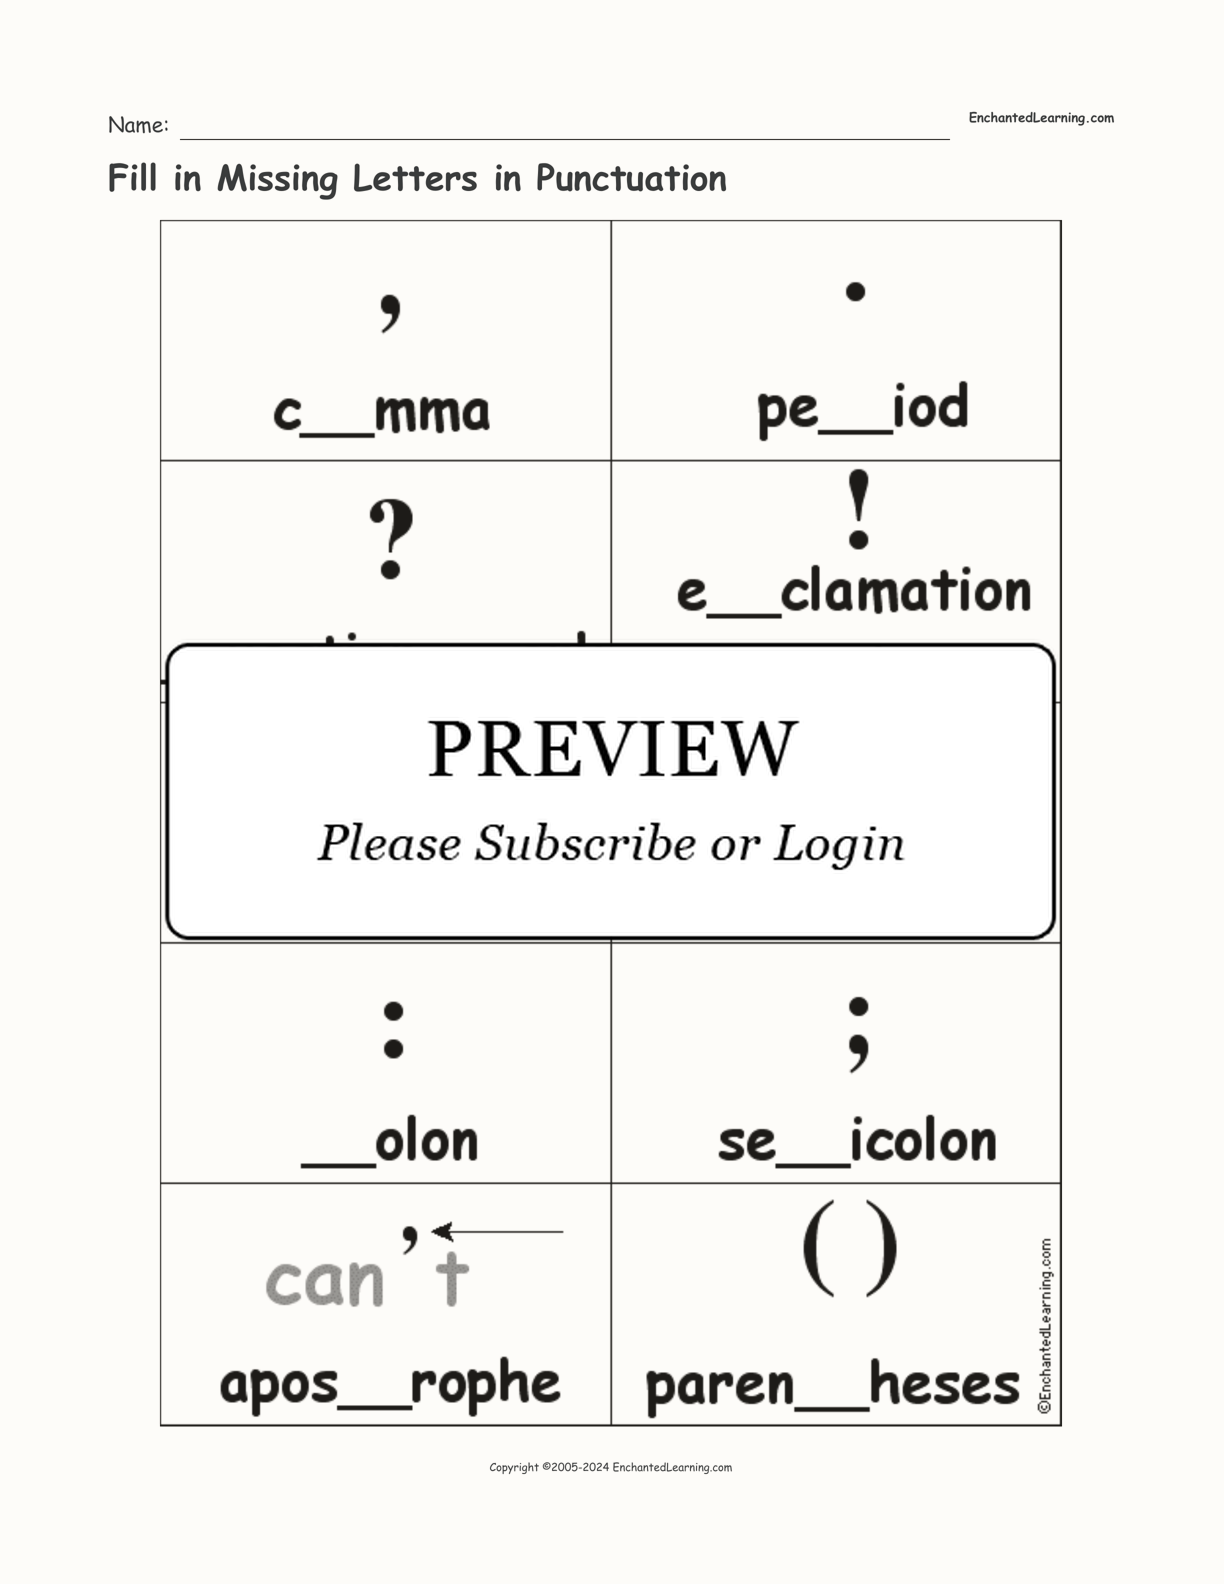 Fill in Missing Letters in Punctuation interactive worksheet page 1